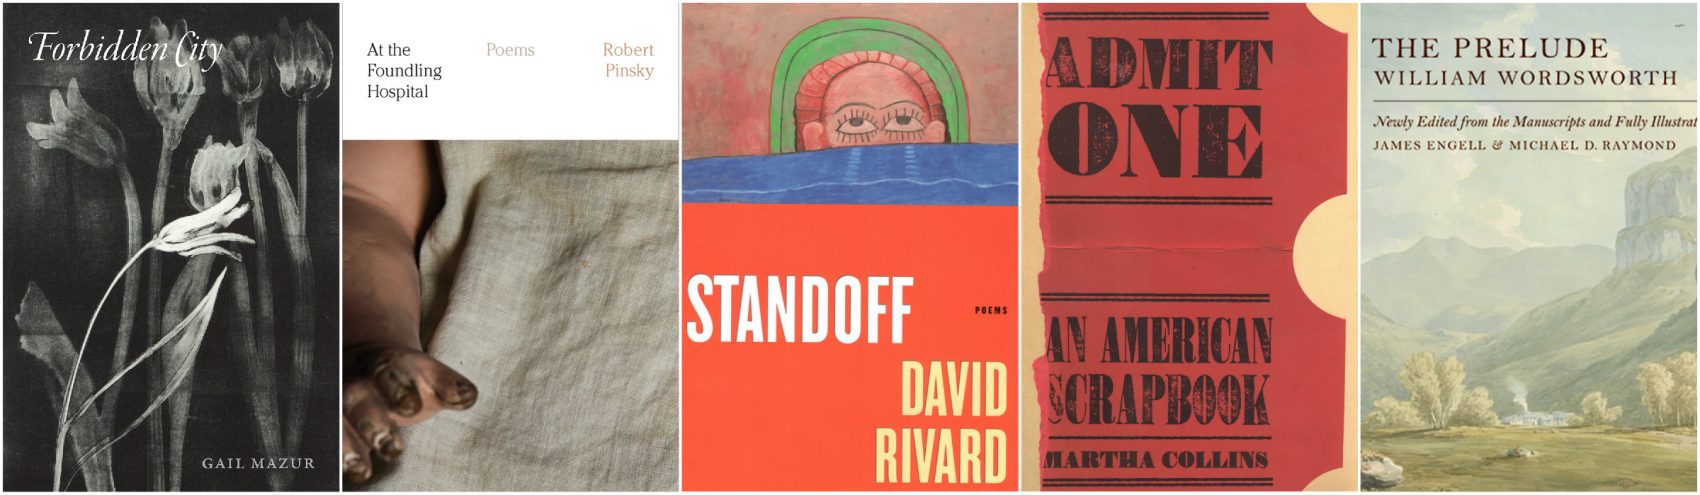 Critic Lloyd Schwartz's pick of the best poetry books of the year. (Courtesy)